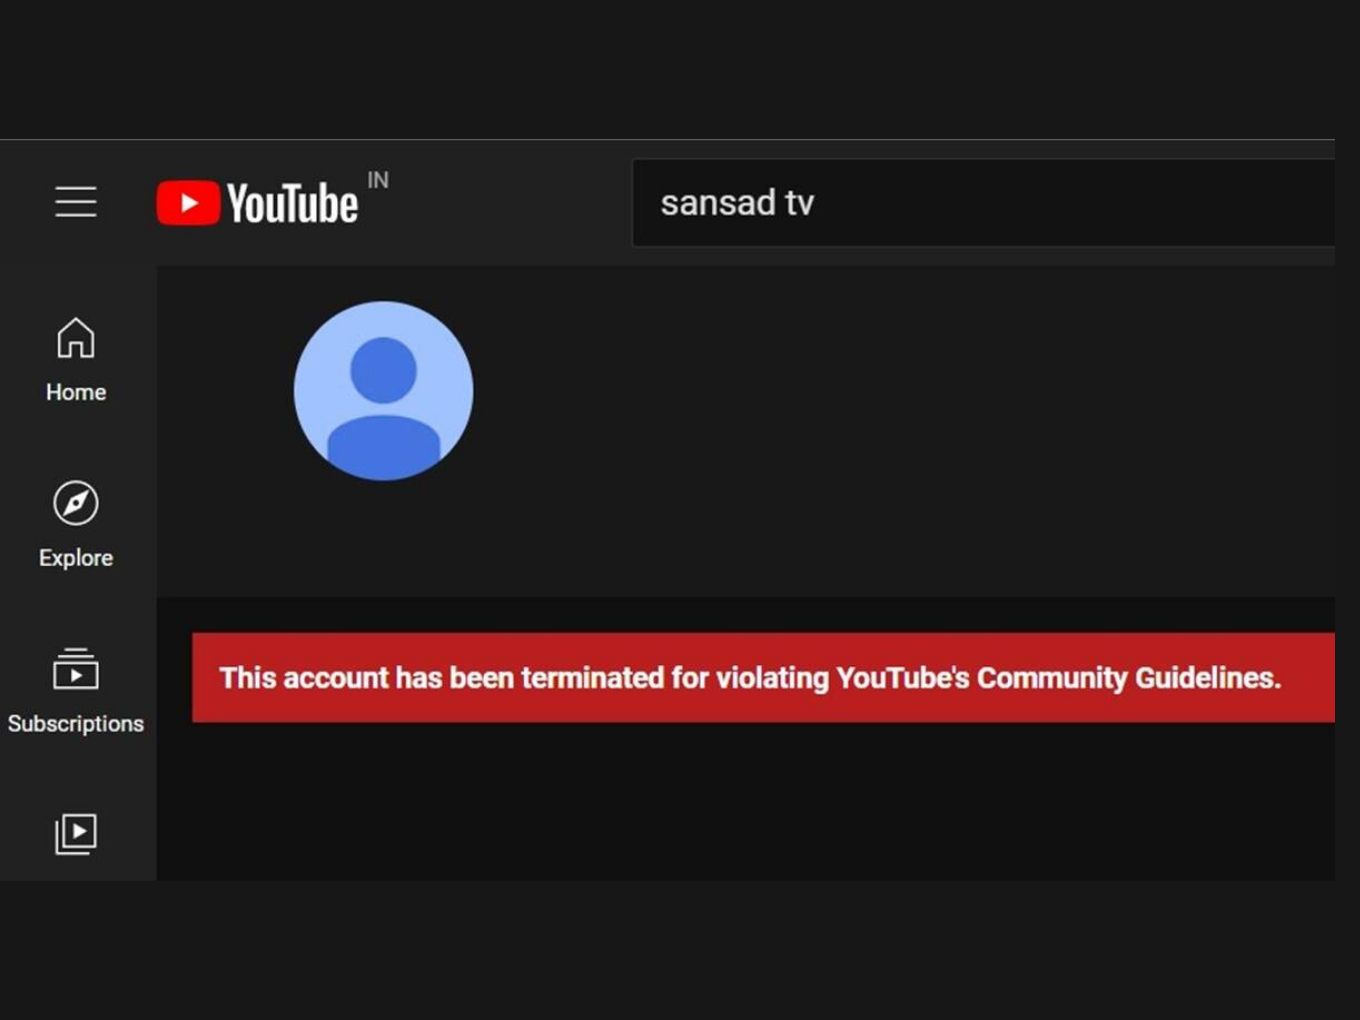 Sansad TV’s YouTube Account Terminated After Hackers Deface Channel